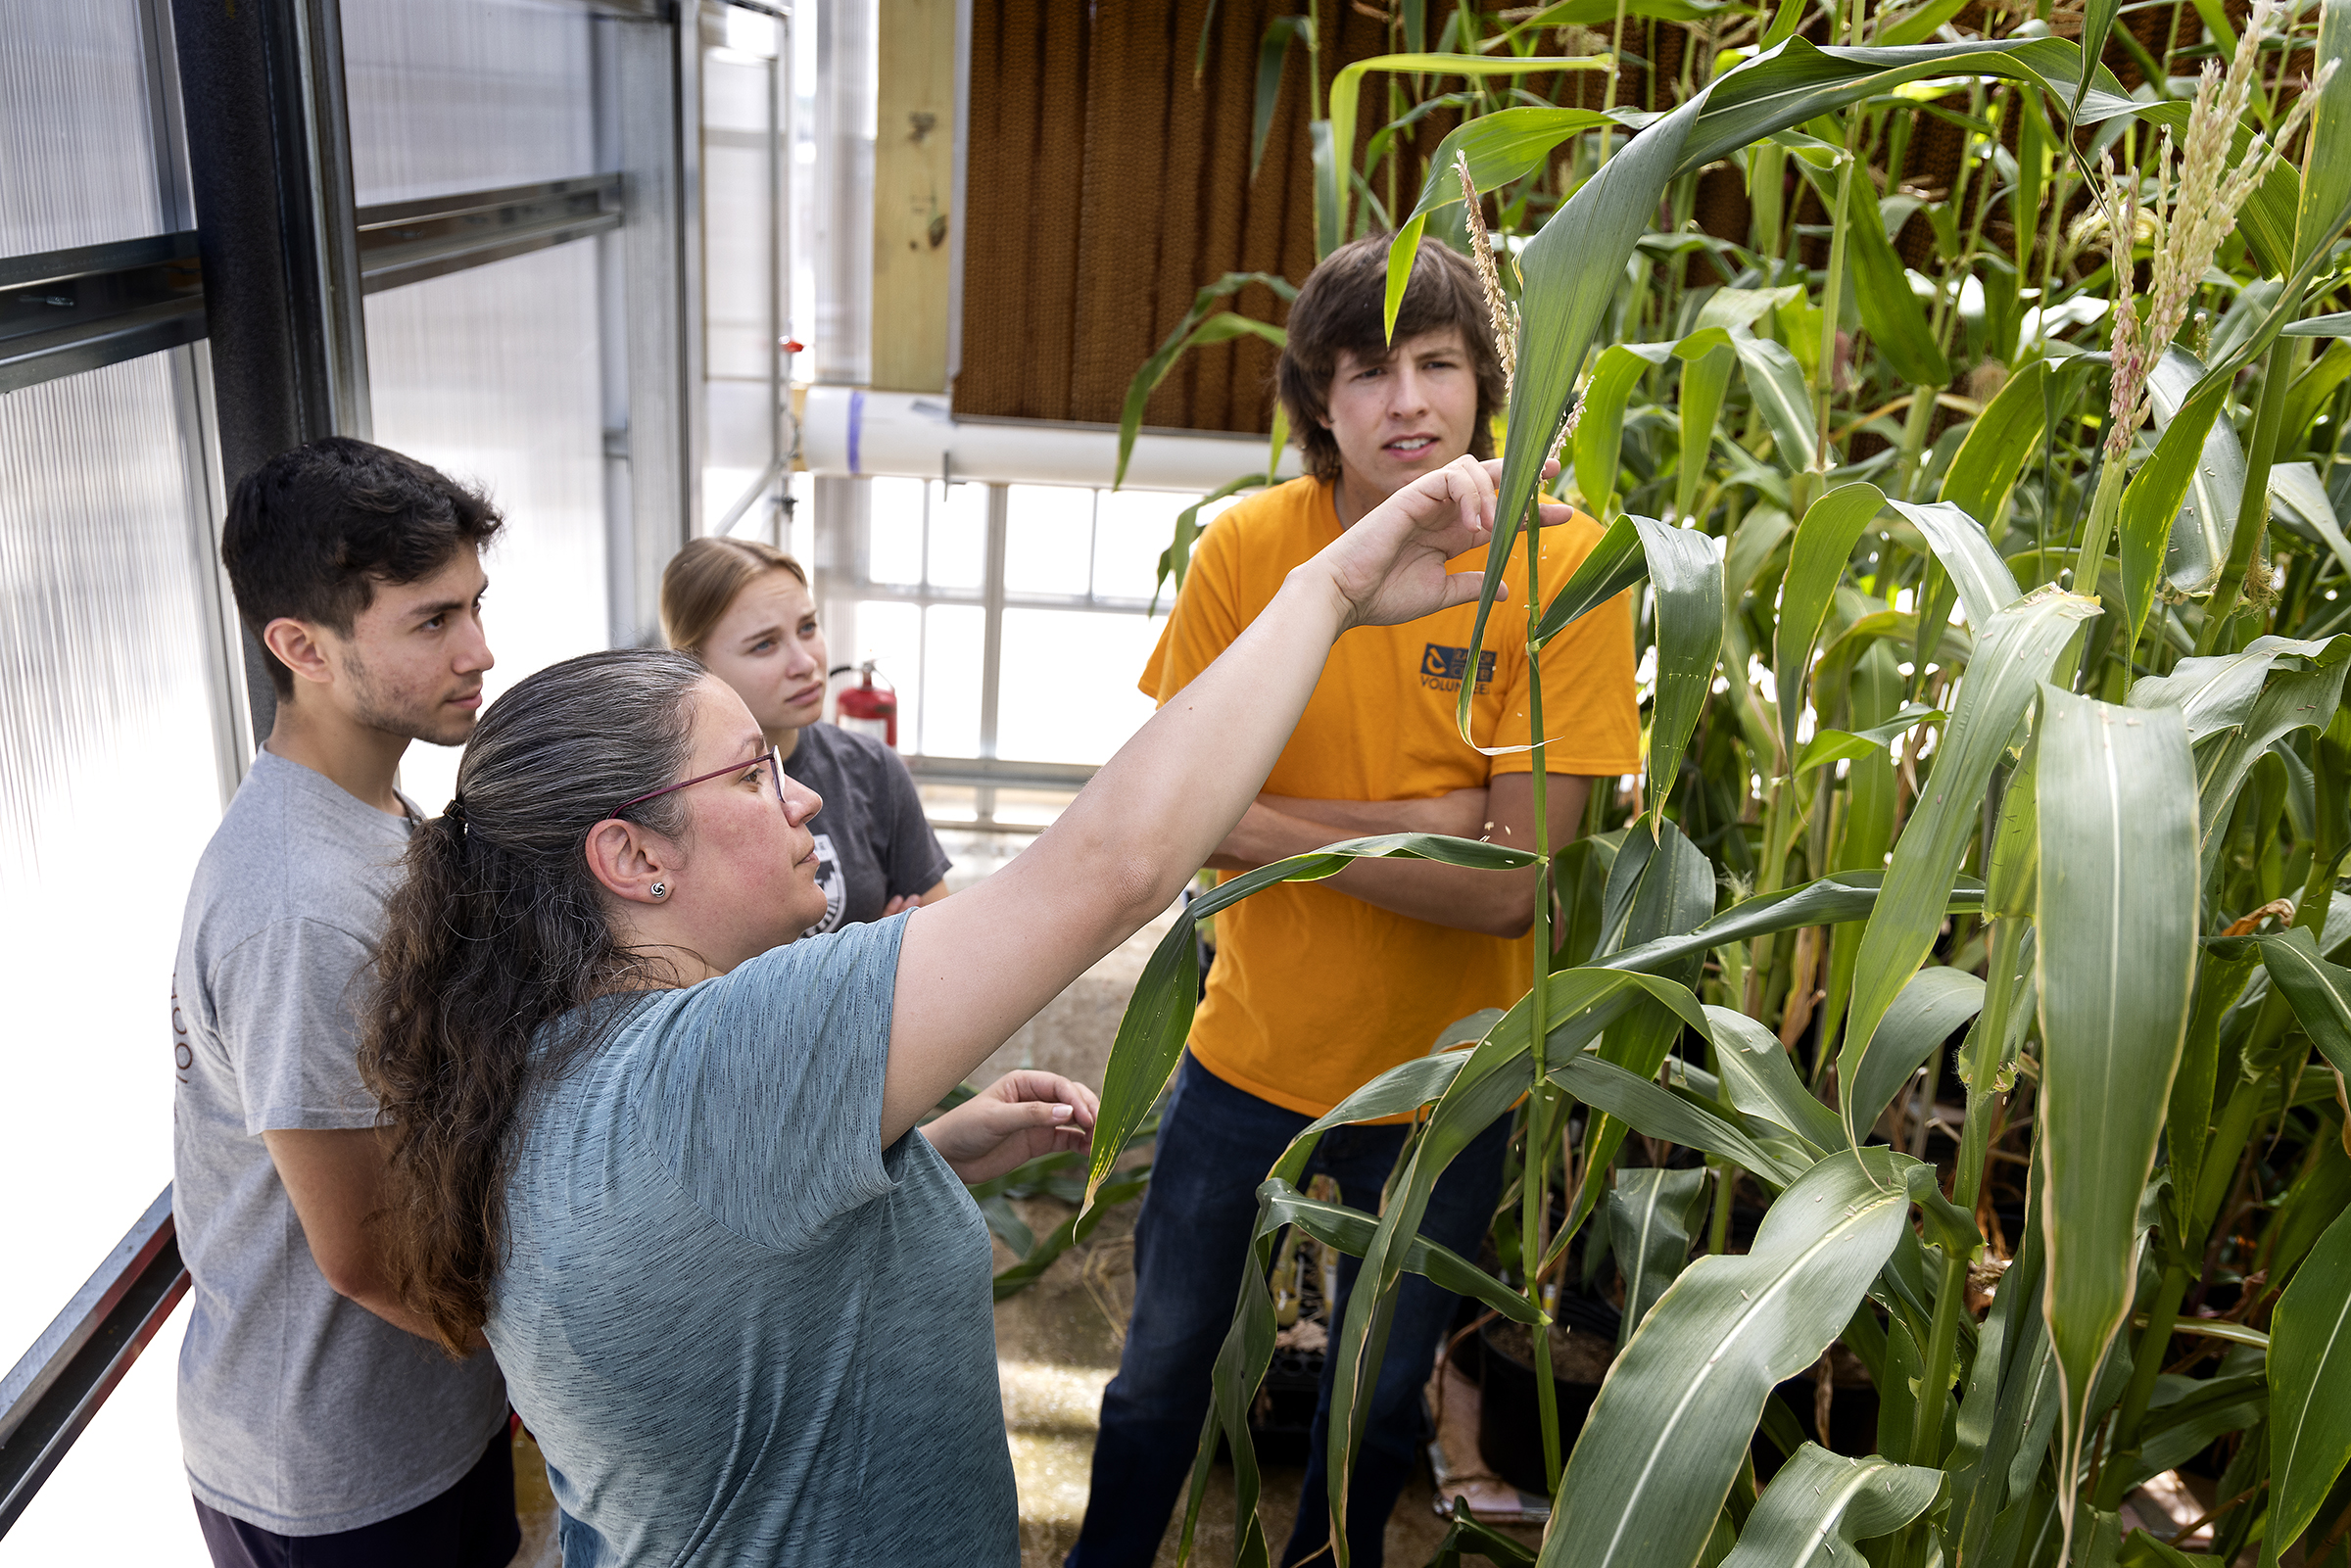 Dr. Susan Wadgymar with students in greenhouse